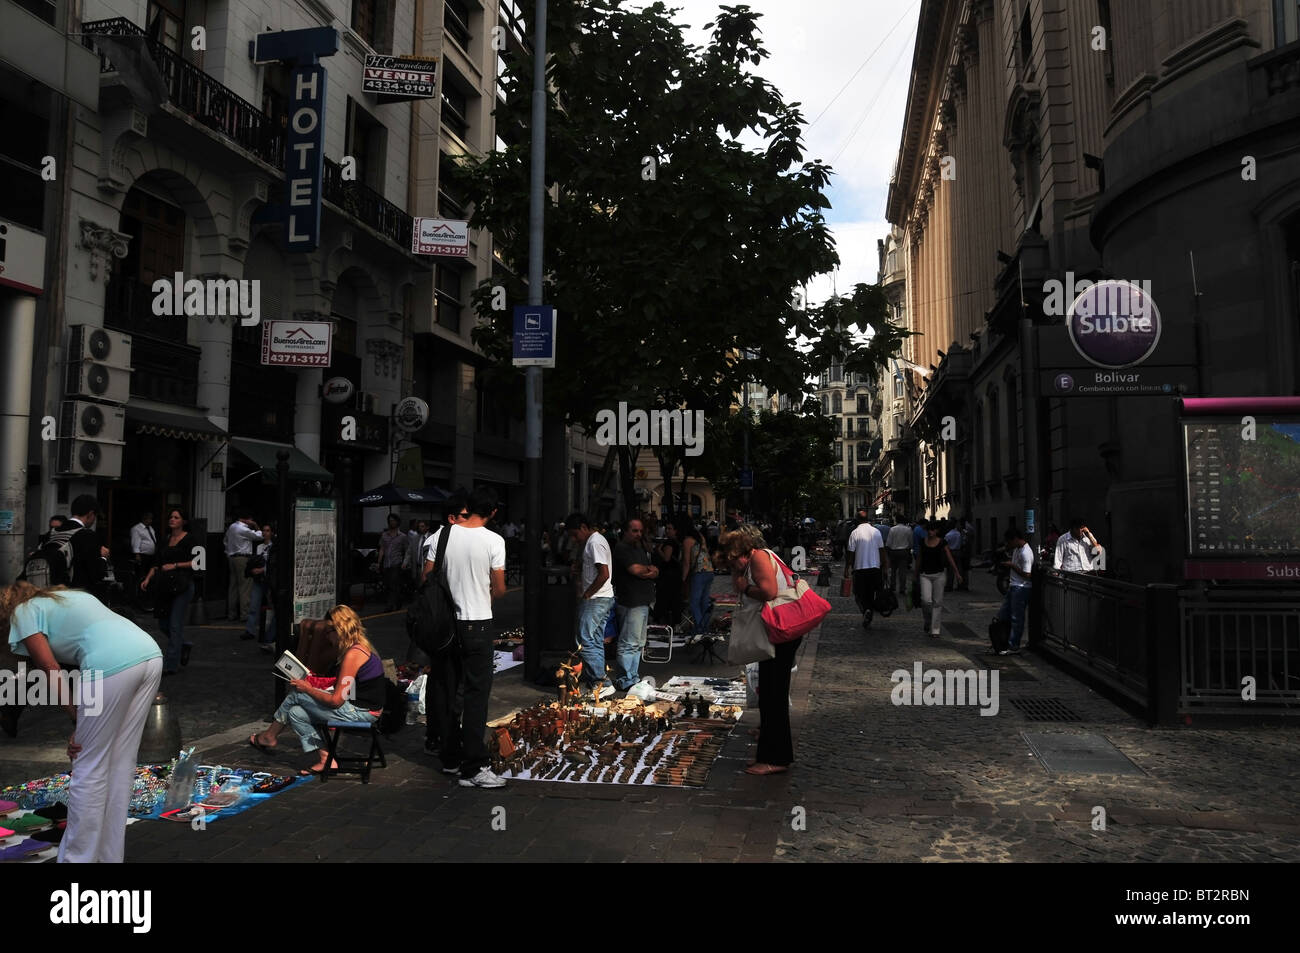 Urban view of shoppers and vendors at a craft market laid out on sheets in the middle of the walkway, Peru Street, Buenos Aires Stock Photo